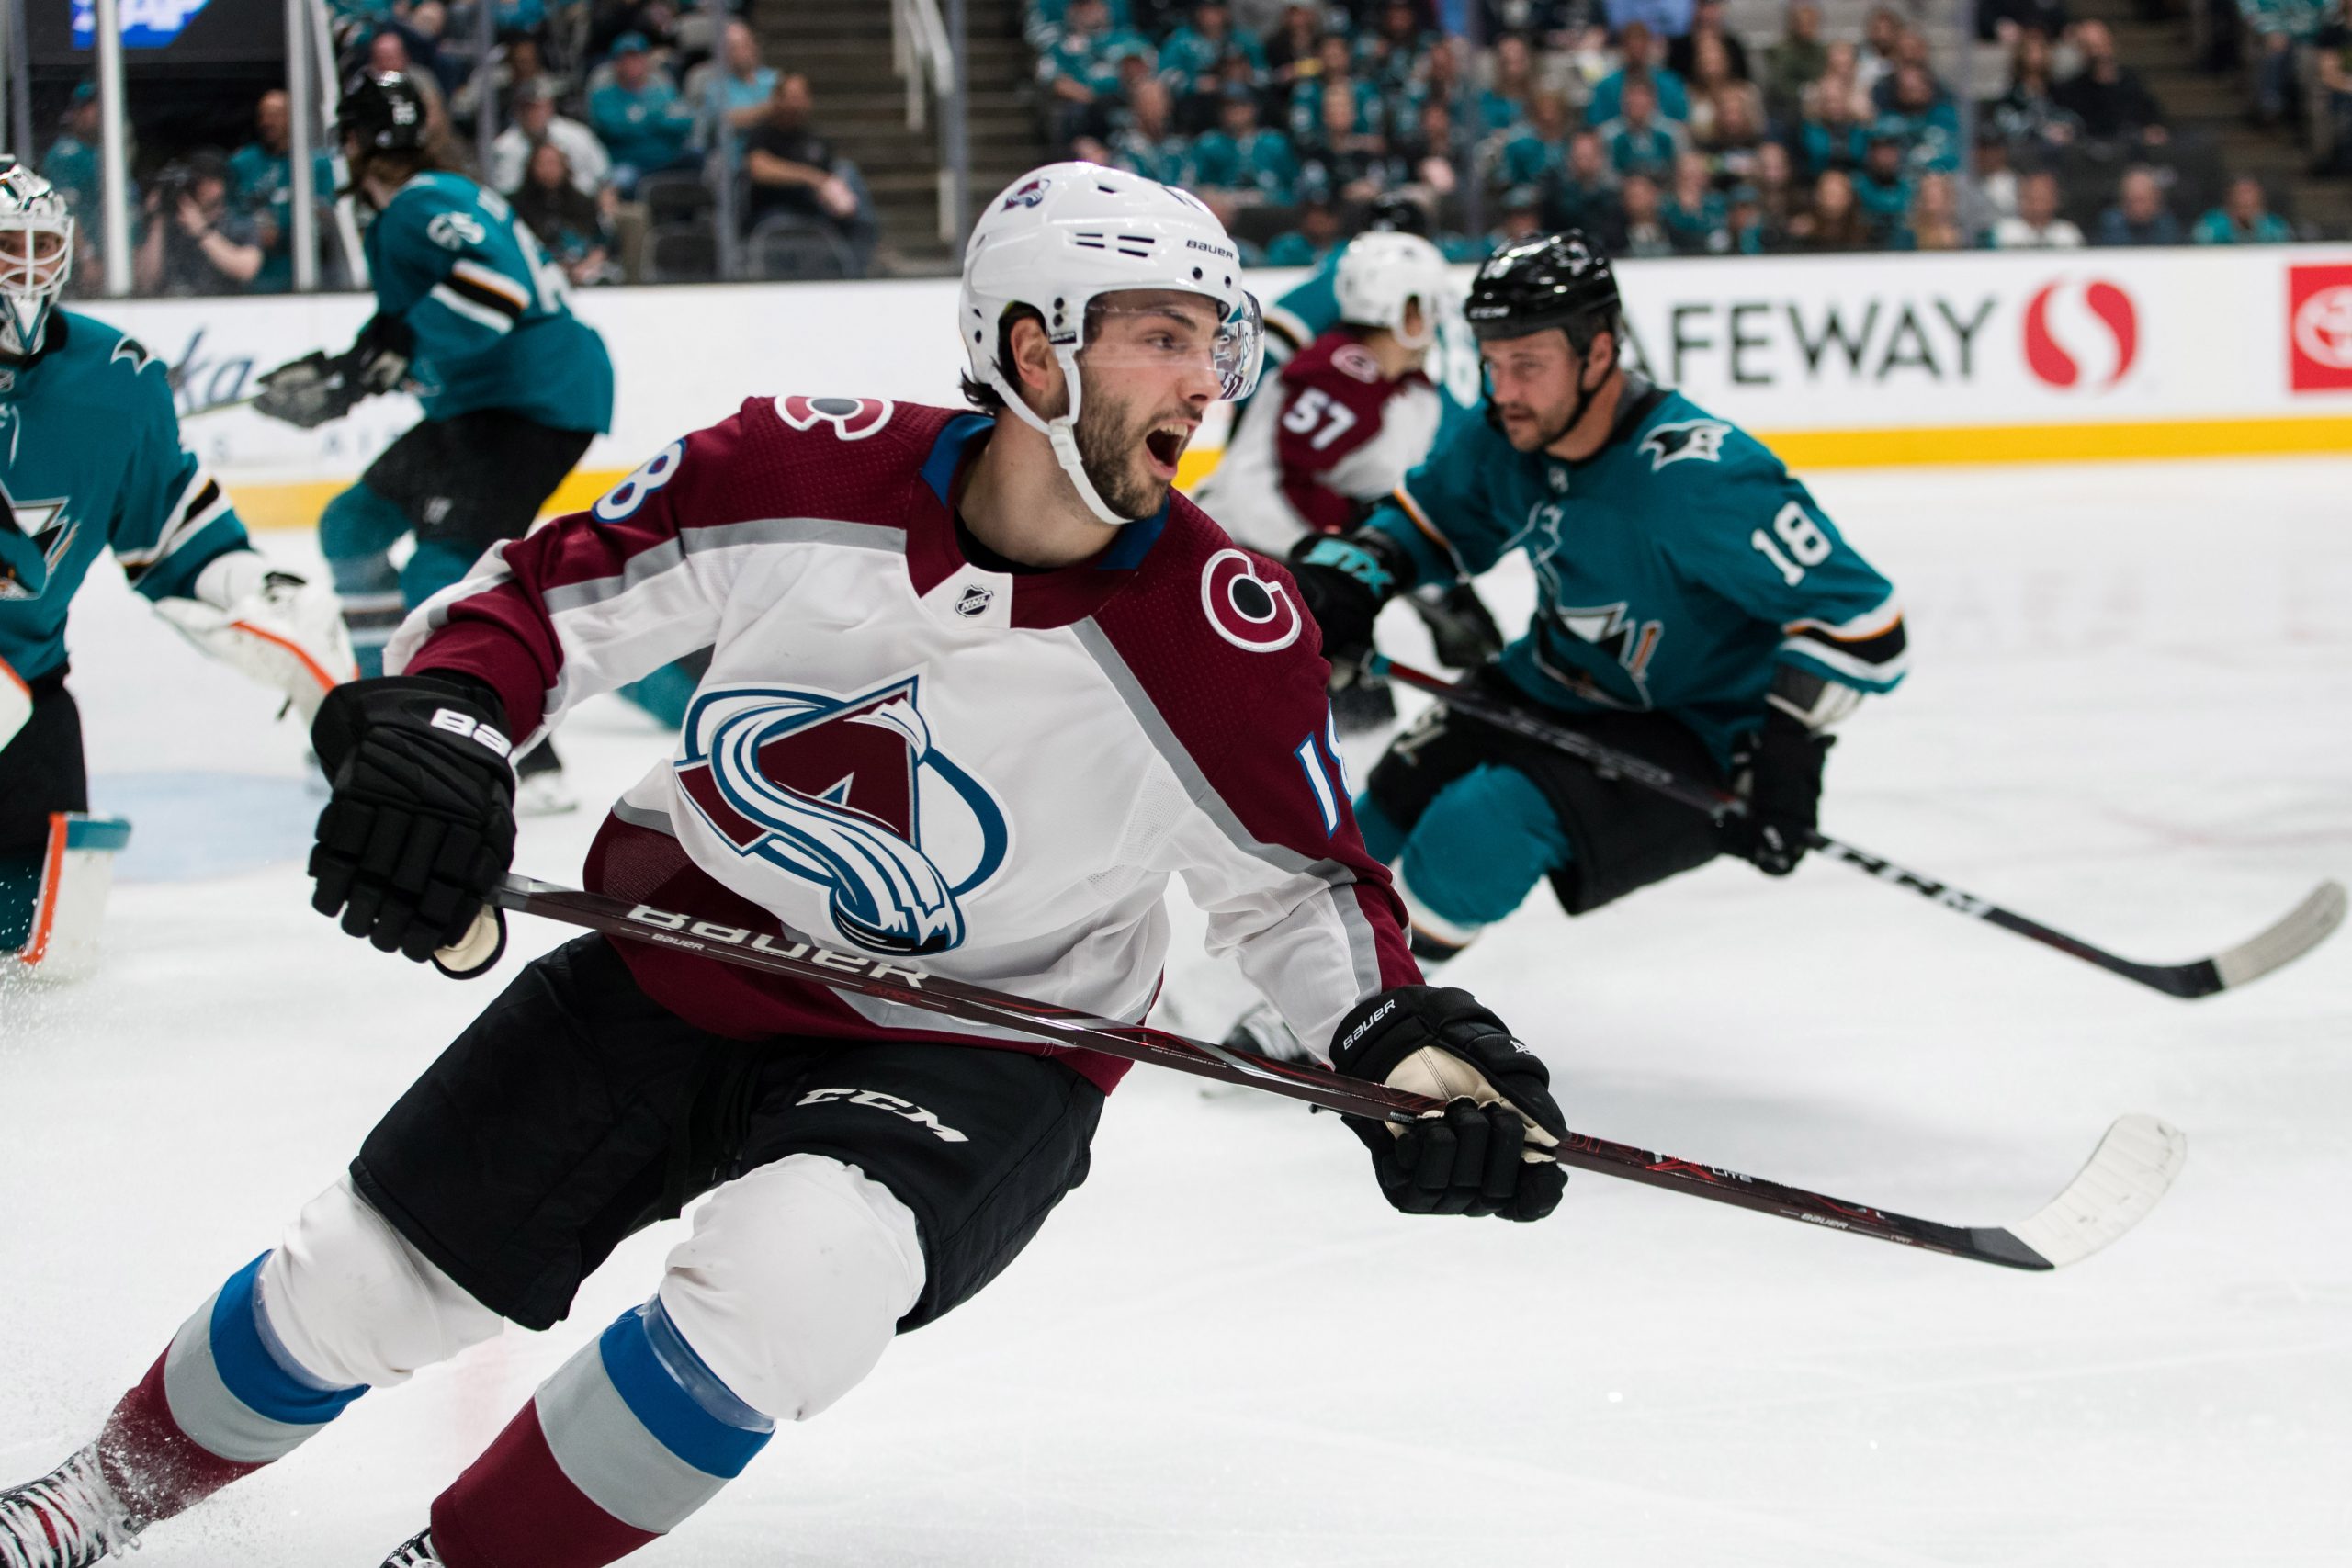 Apr 28, 2019; San Jose, CA, USA; Colorado Avalanche center Derick Brassard (18) reacts after missing a shot against the San Jose Sharks in the second period of game two of the second round of the 2019 Stanley Cup Playoffs at SAP Center at San Jose. Mandatory Credit: John Hefti-USA TODAY Sports